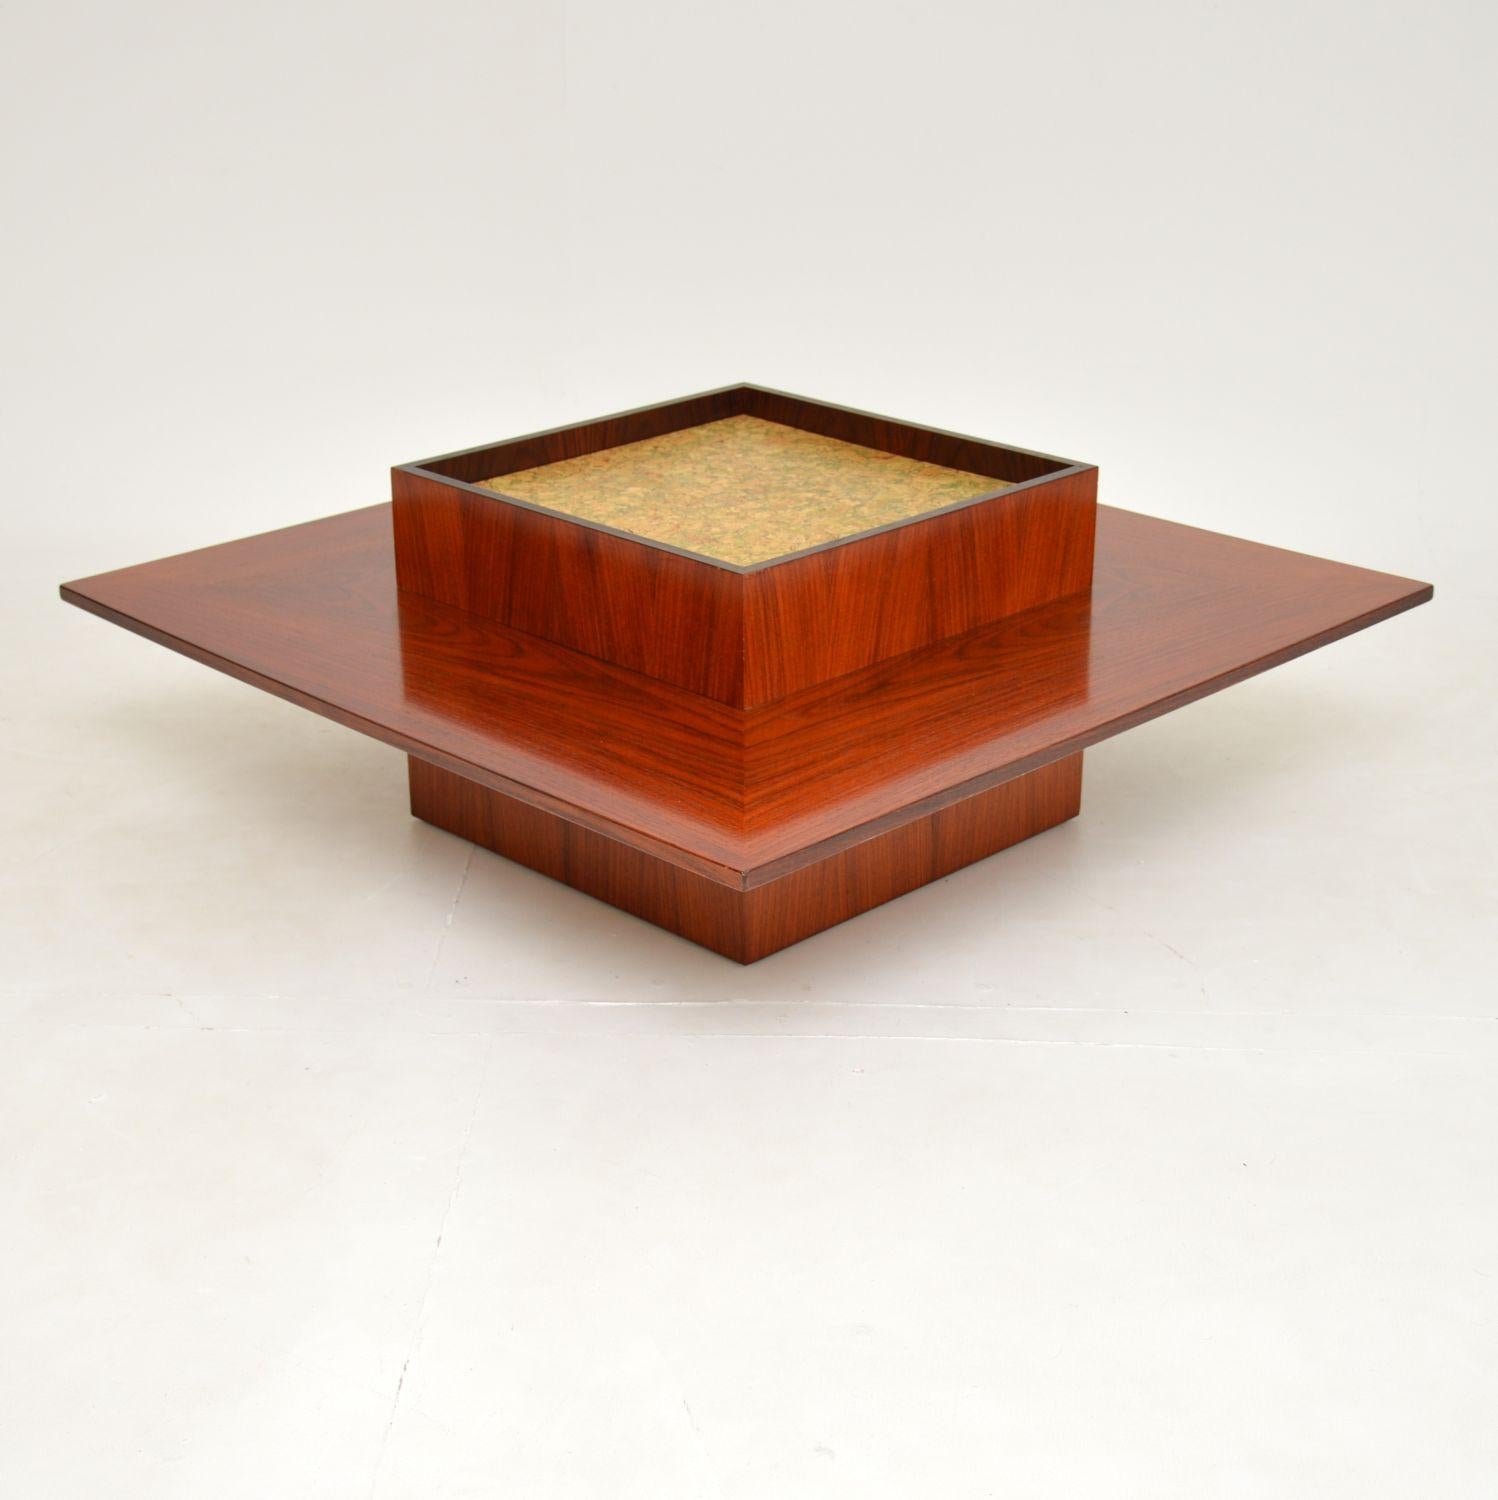 An excellent and very impressive Danish vintage coffee table. This was made in Denmark by Mobelintarsia, it dates from around the 1960-1970’s.

The quality is fantastic and this is a great size. It is large and square, with a very interesting